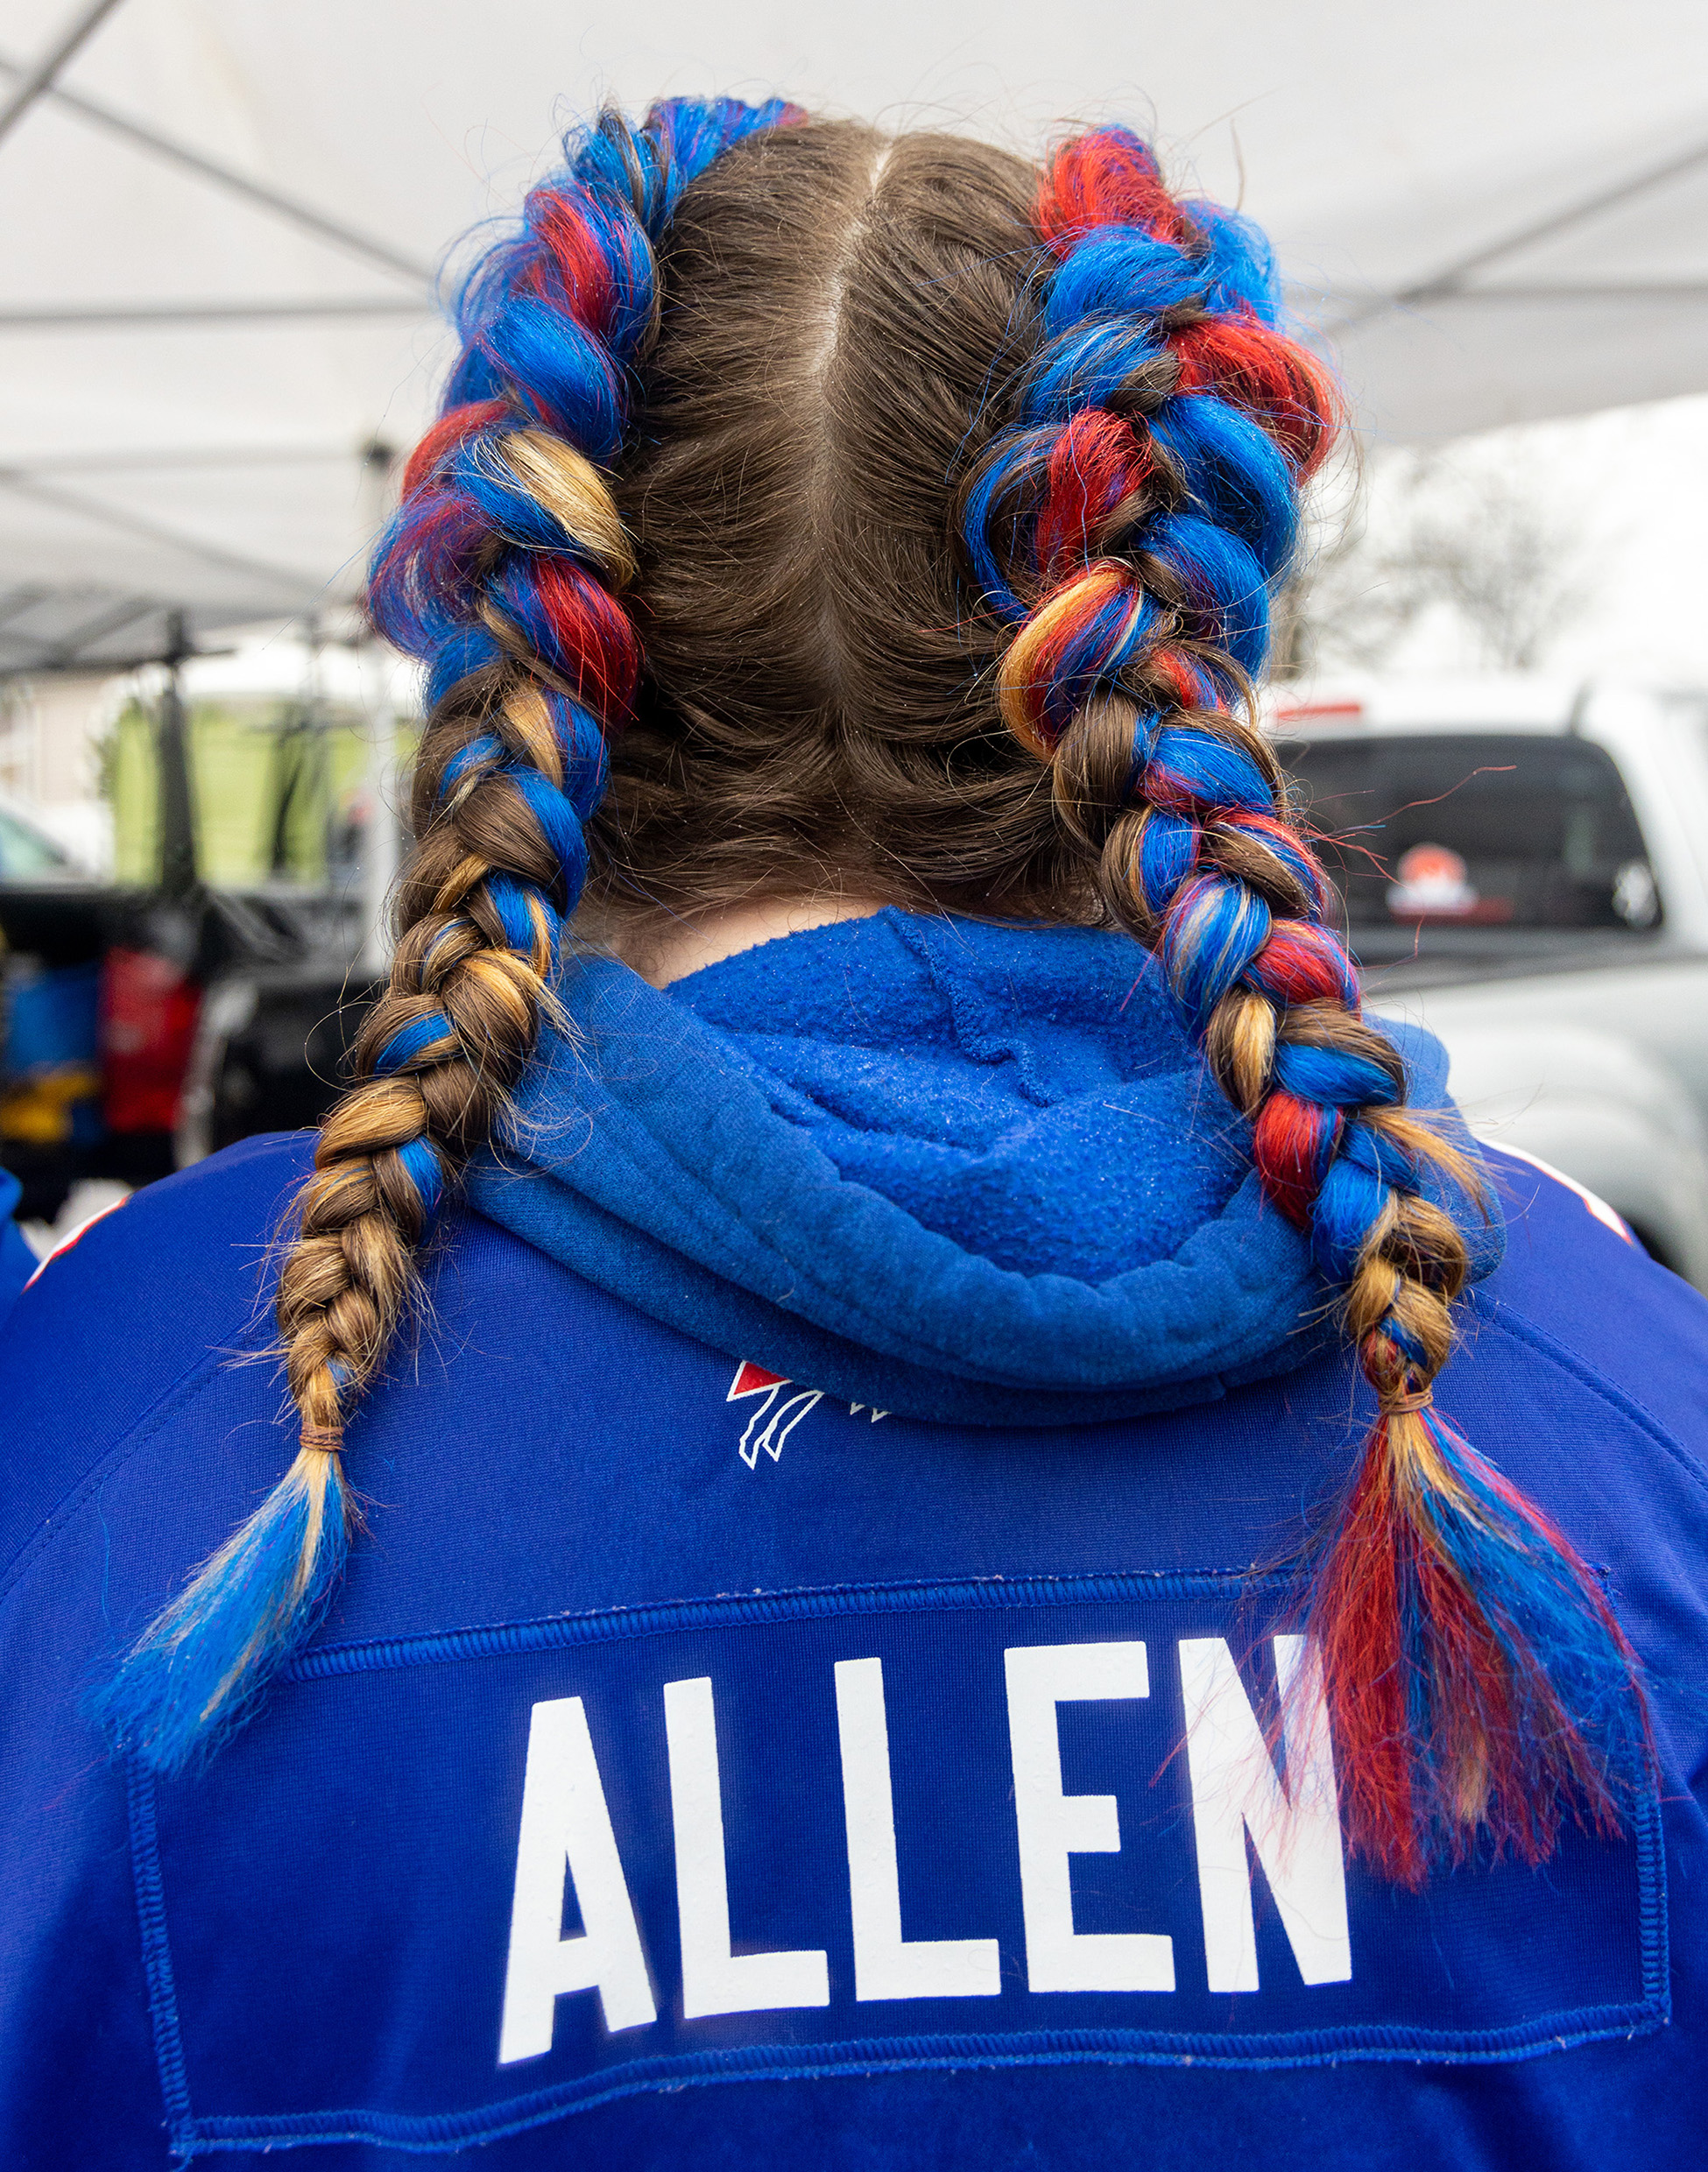 A bills fan wearing a Josh Allen jersey with red and blue pigtails.